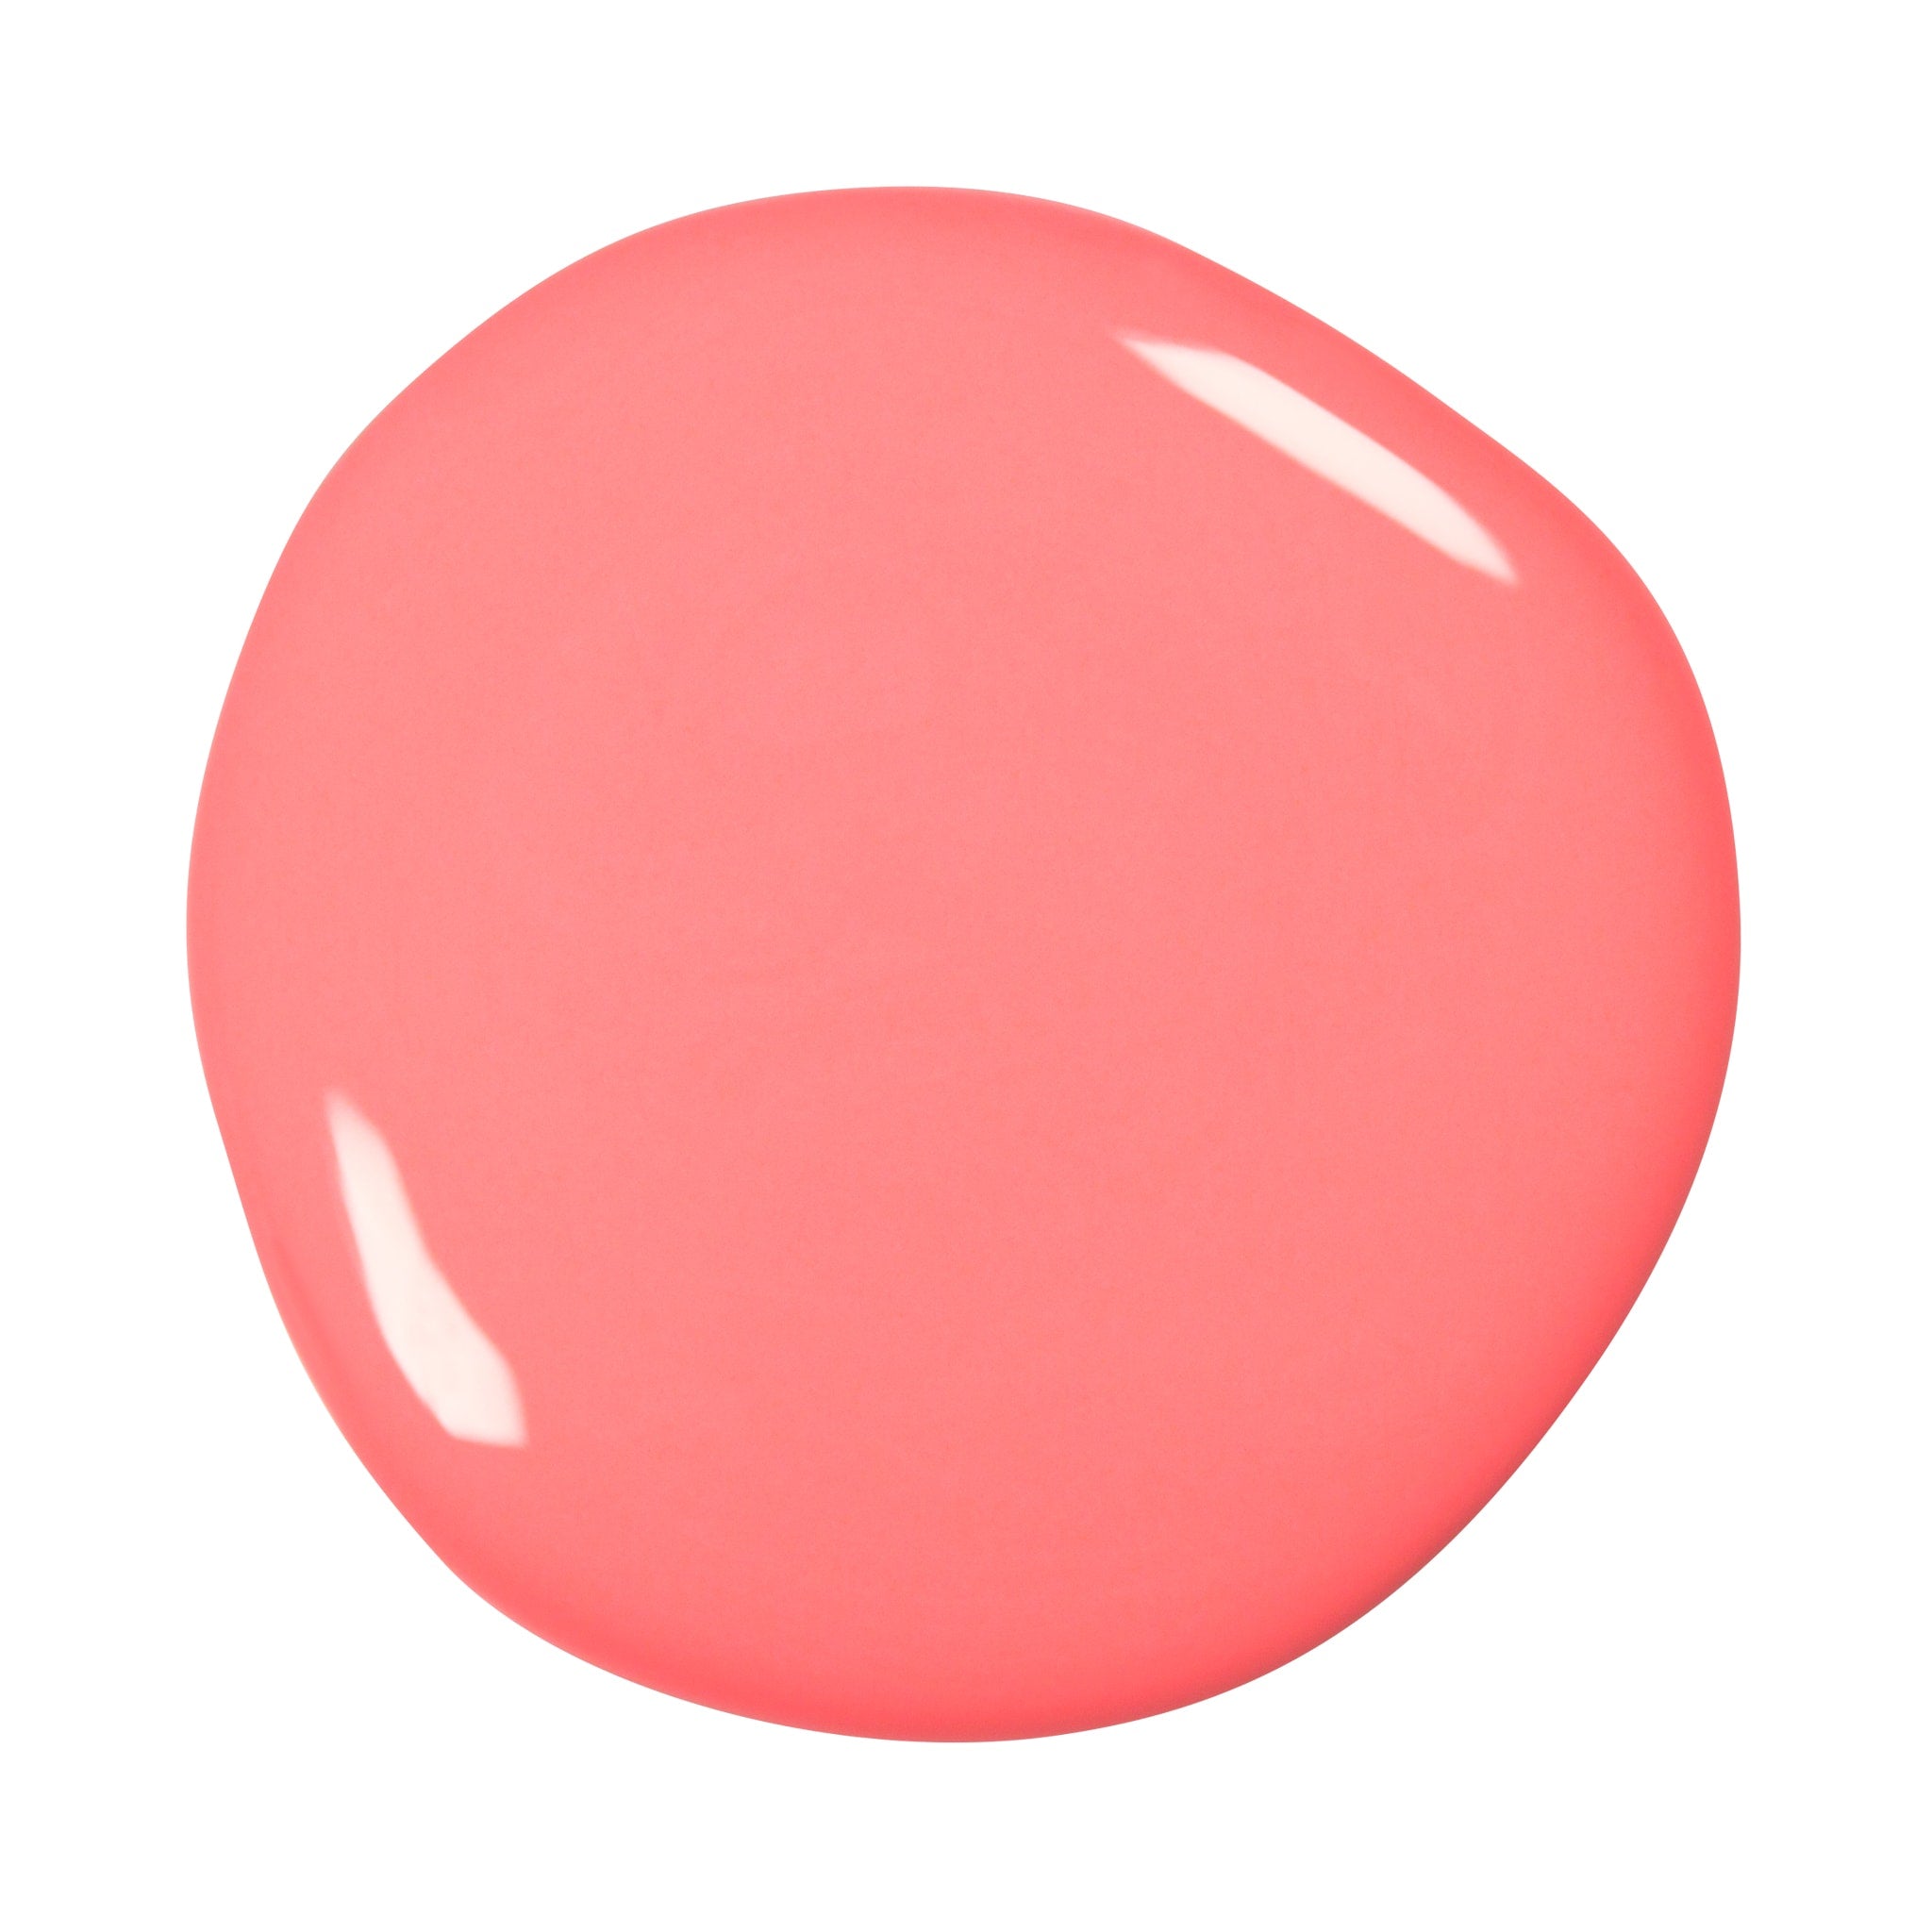 Farb Gel Classic pink bubble